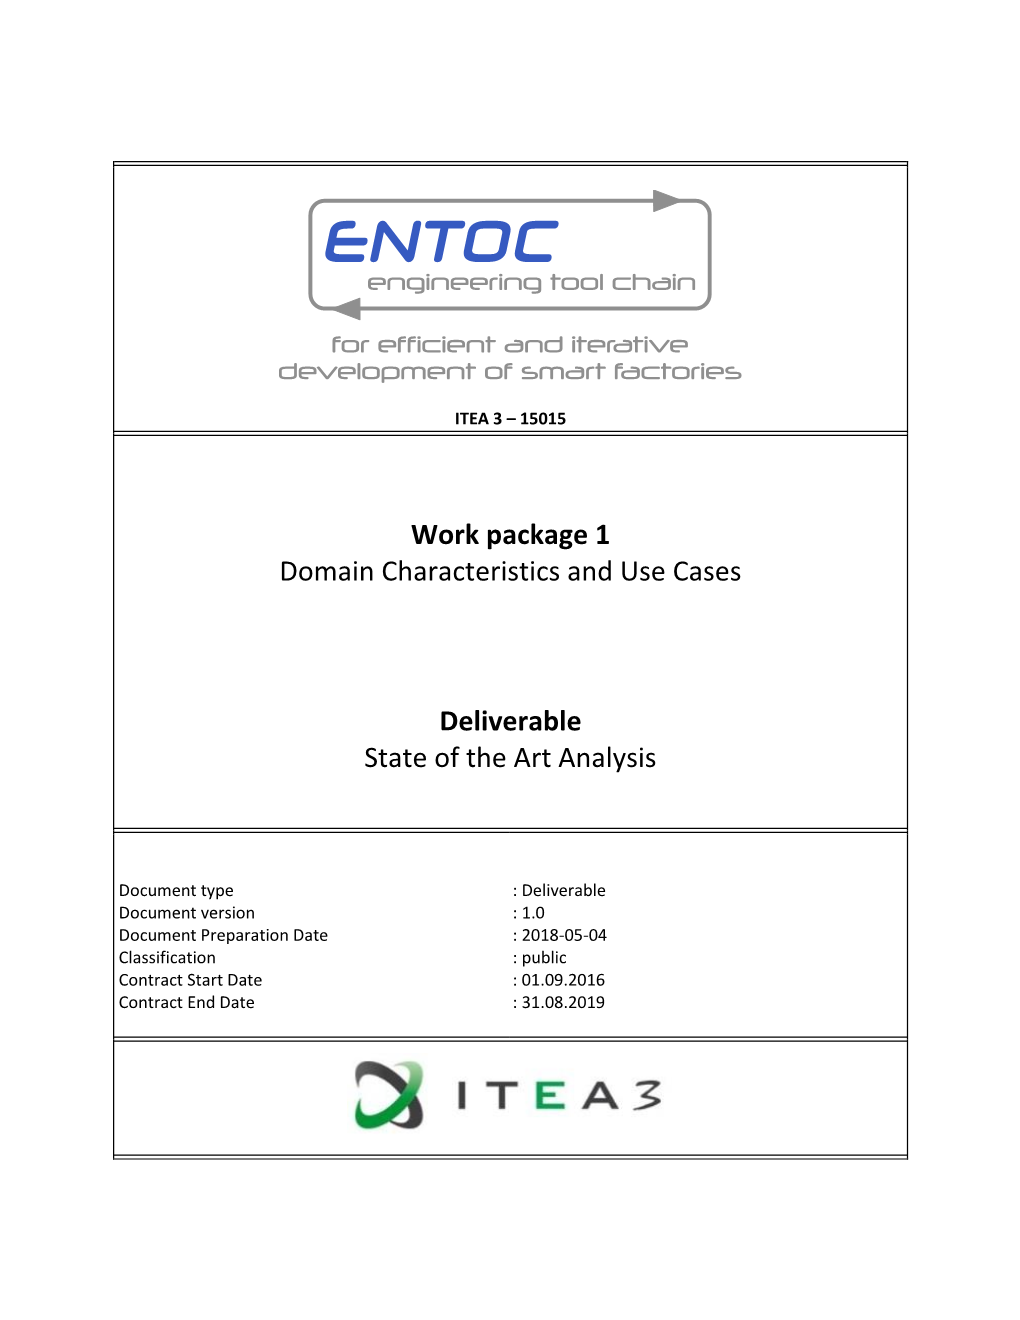 ENTOC Engineering Tool Chain for Efficient and Iterative Development of Smart Factories ITEA 3, 15015